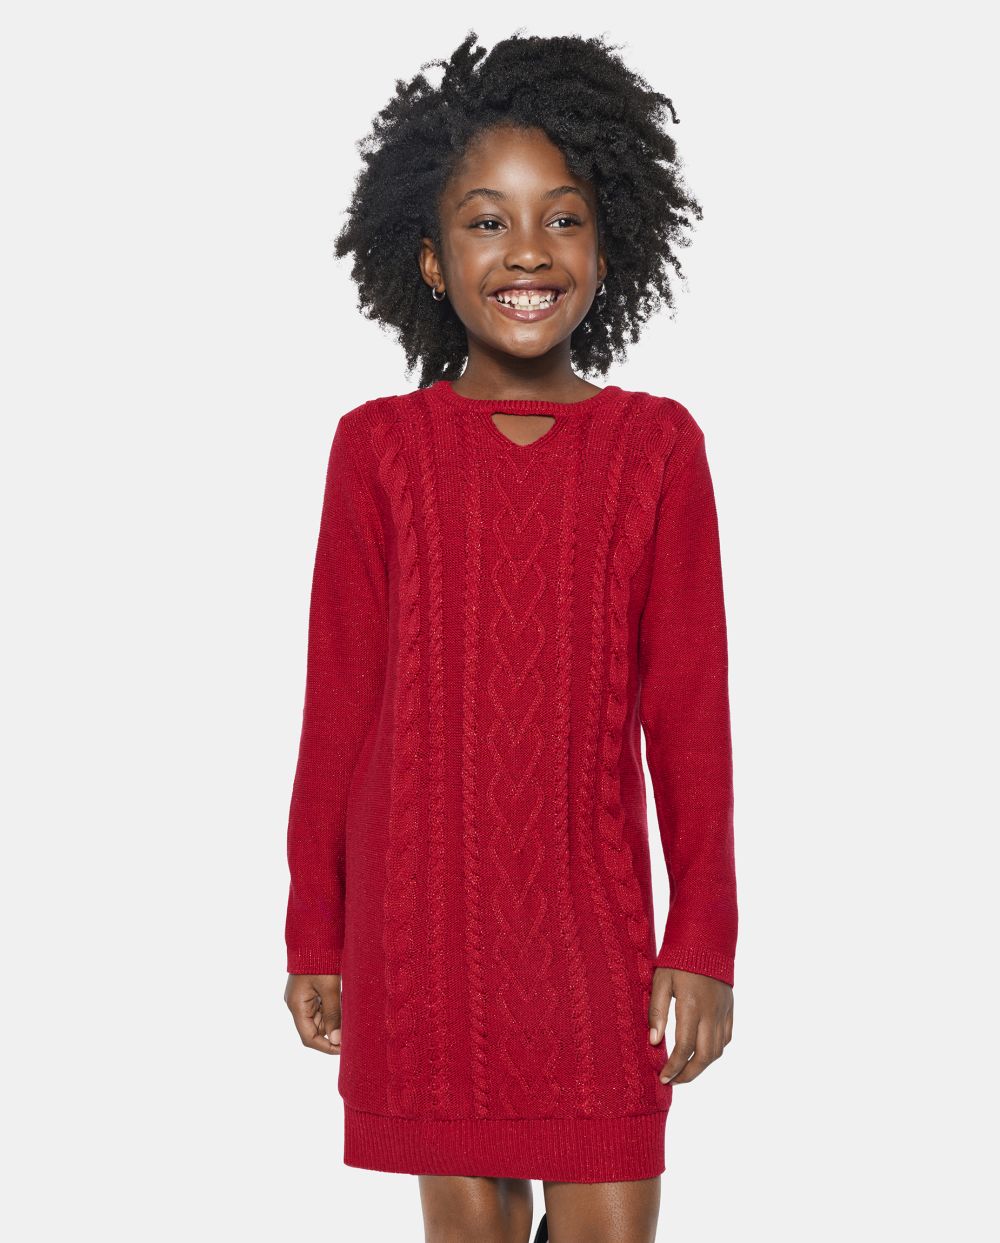 Girls Above the Knee Crew Neck Long Sleeves Cutout Sweater Dress